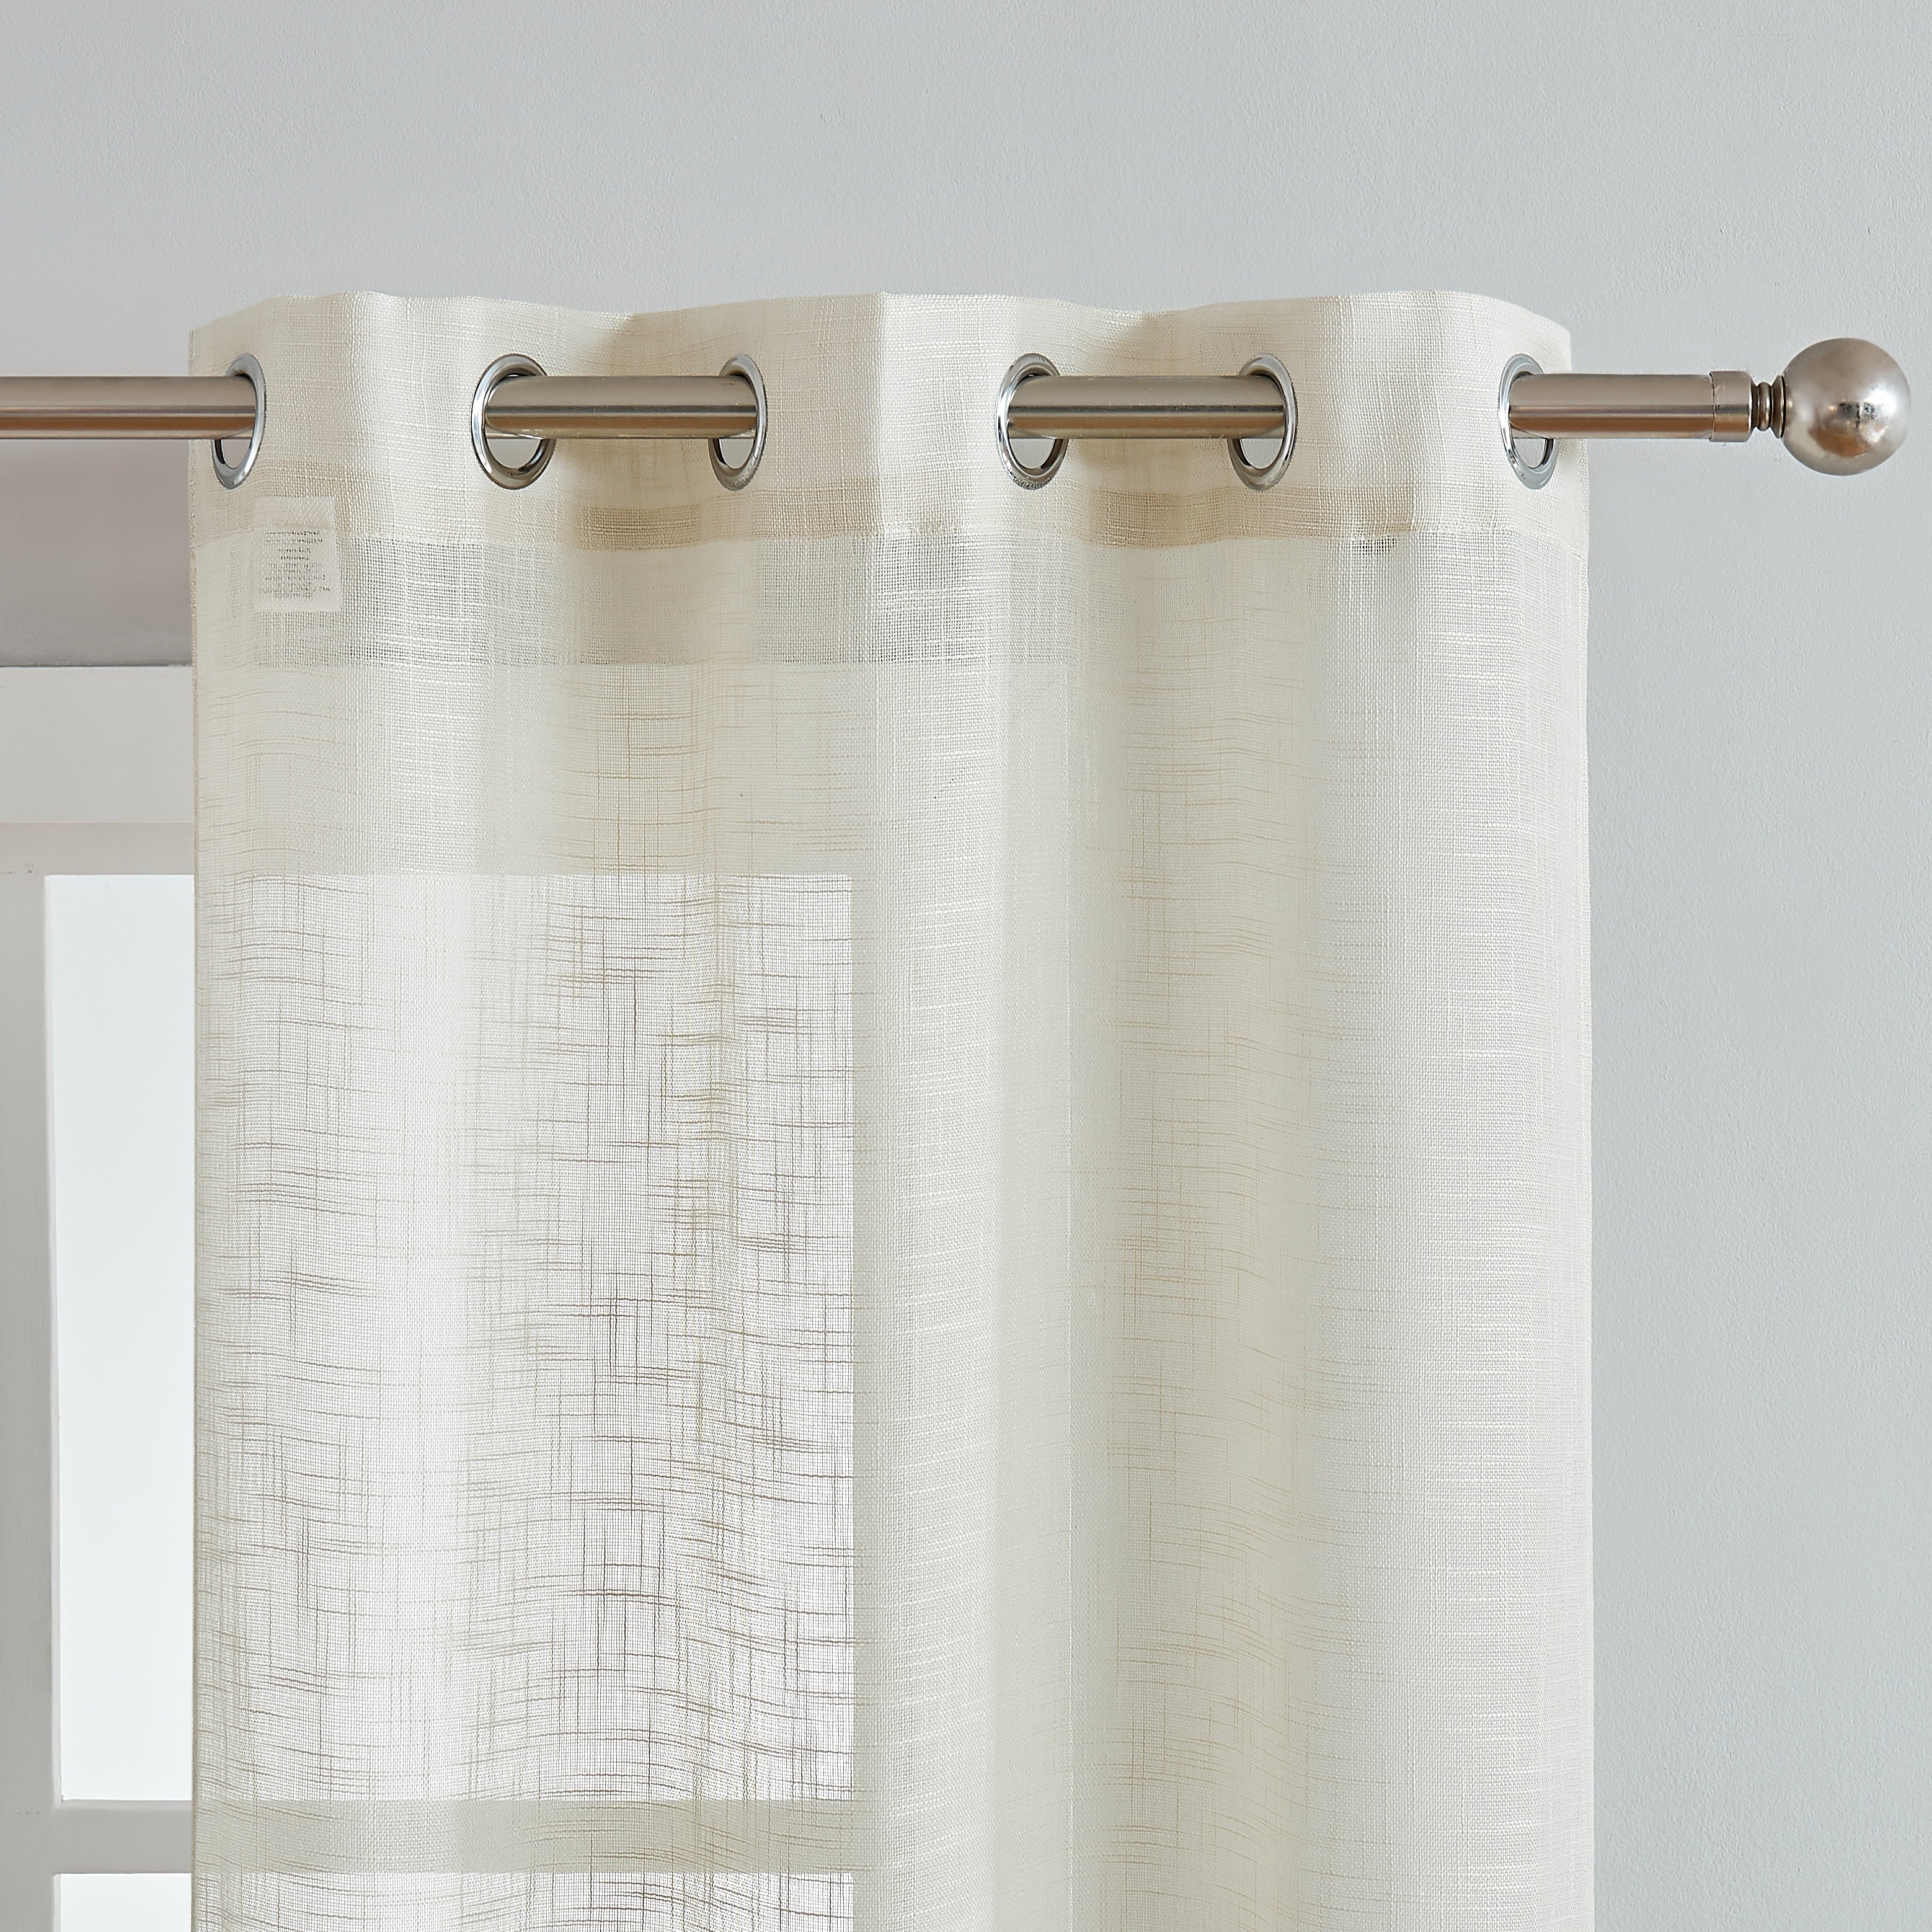 Dainty Home Hannah Solid Criss-Cross Weave Fabric Semi-Sheer Airy & Breathable Light Filtering Grommet Panel Pair